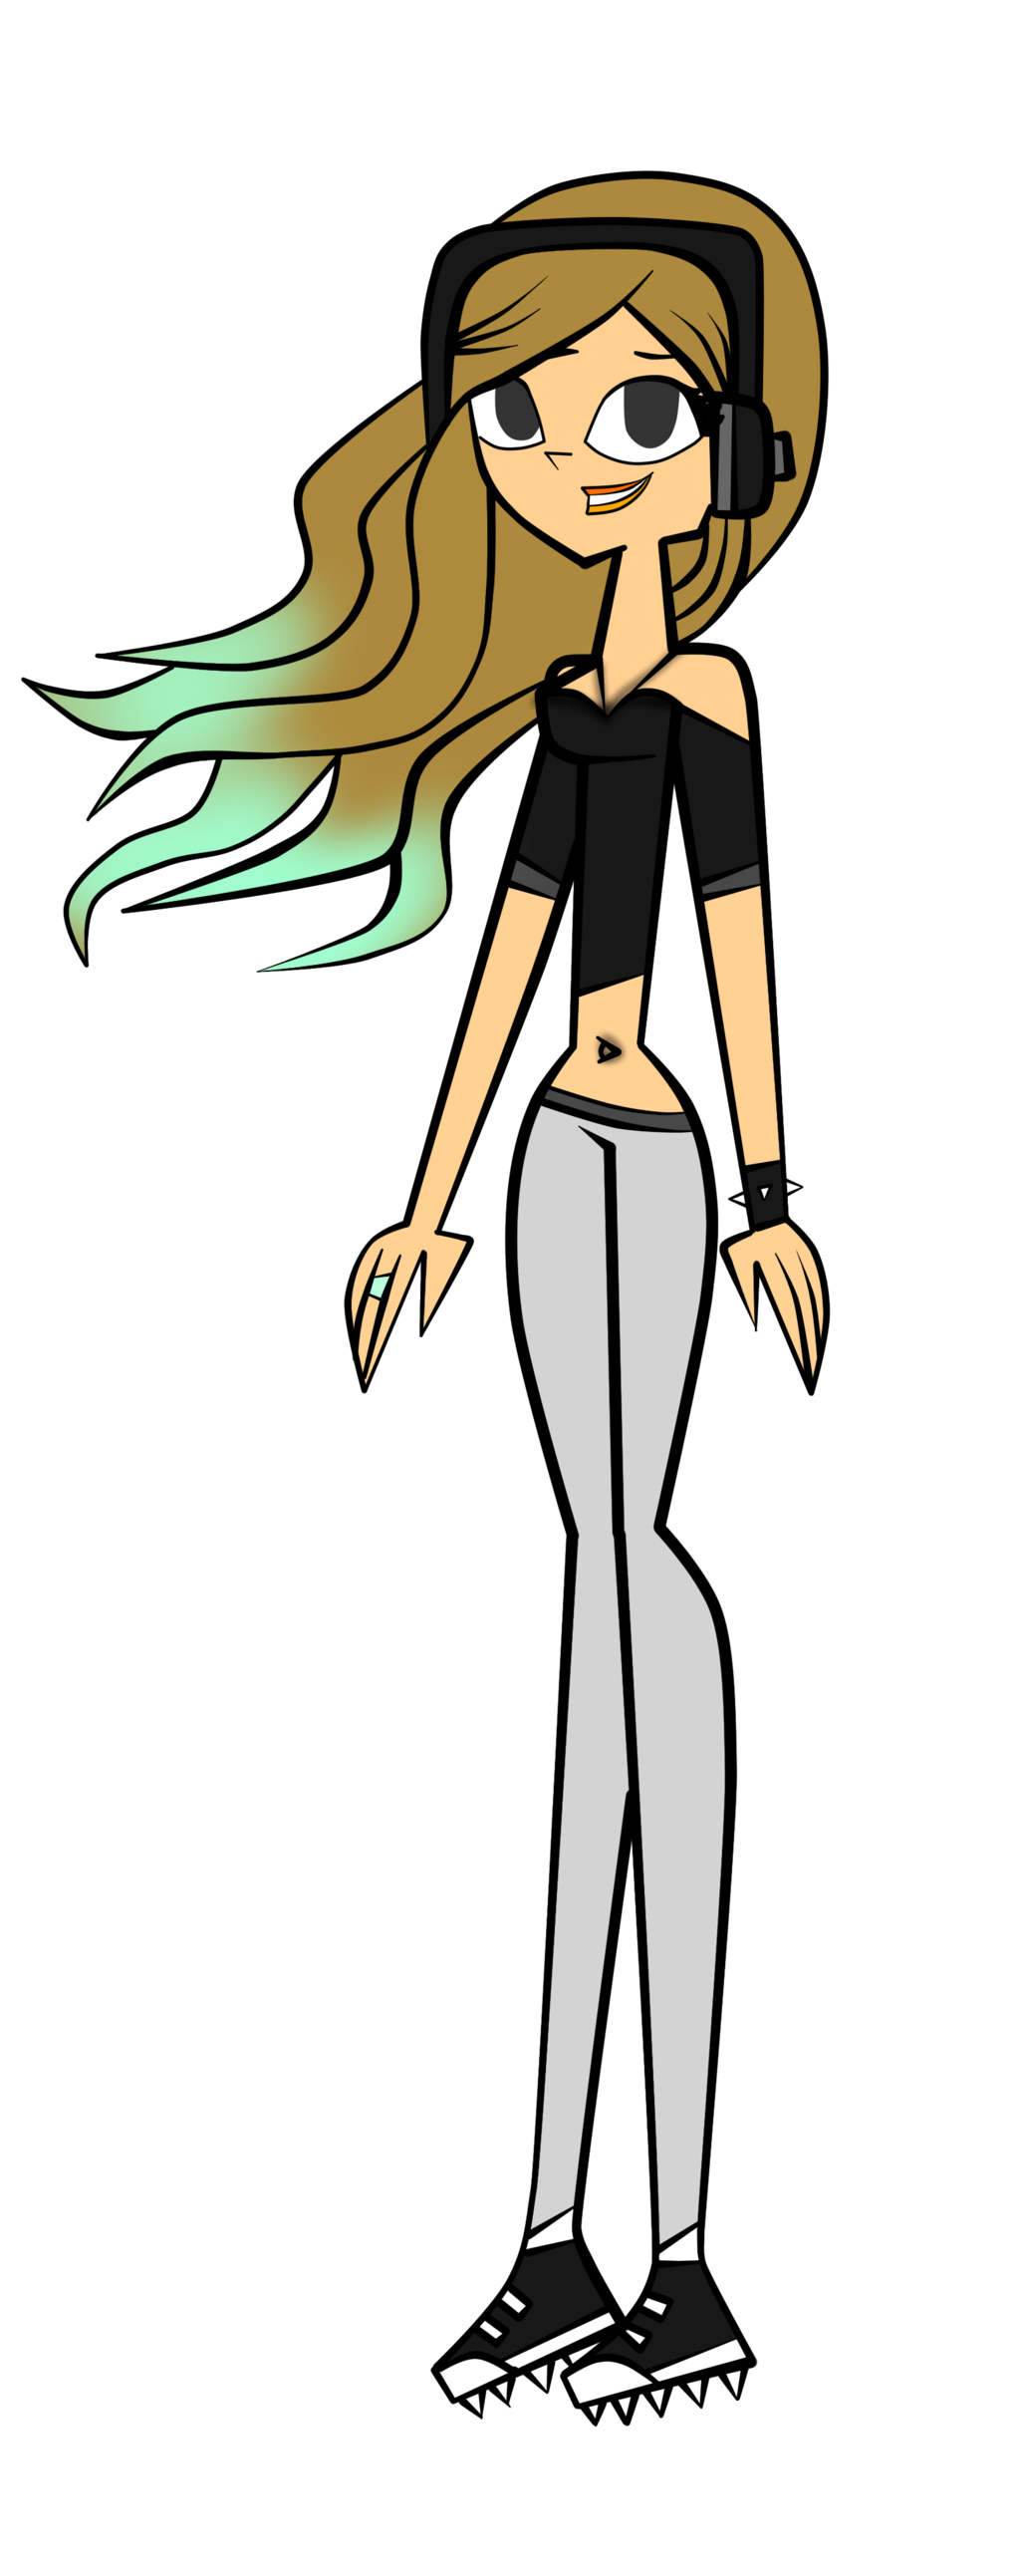 Total Drama Island Fancharacters Images on Fanpop.